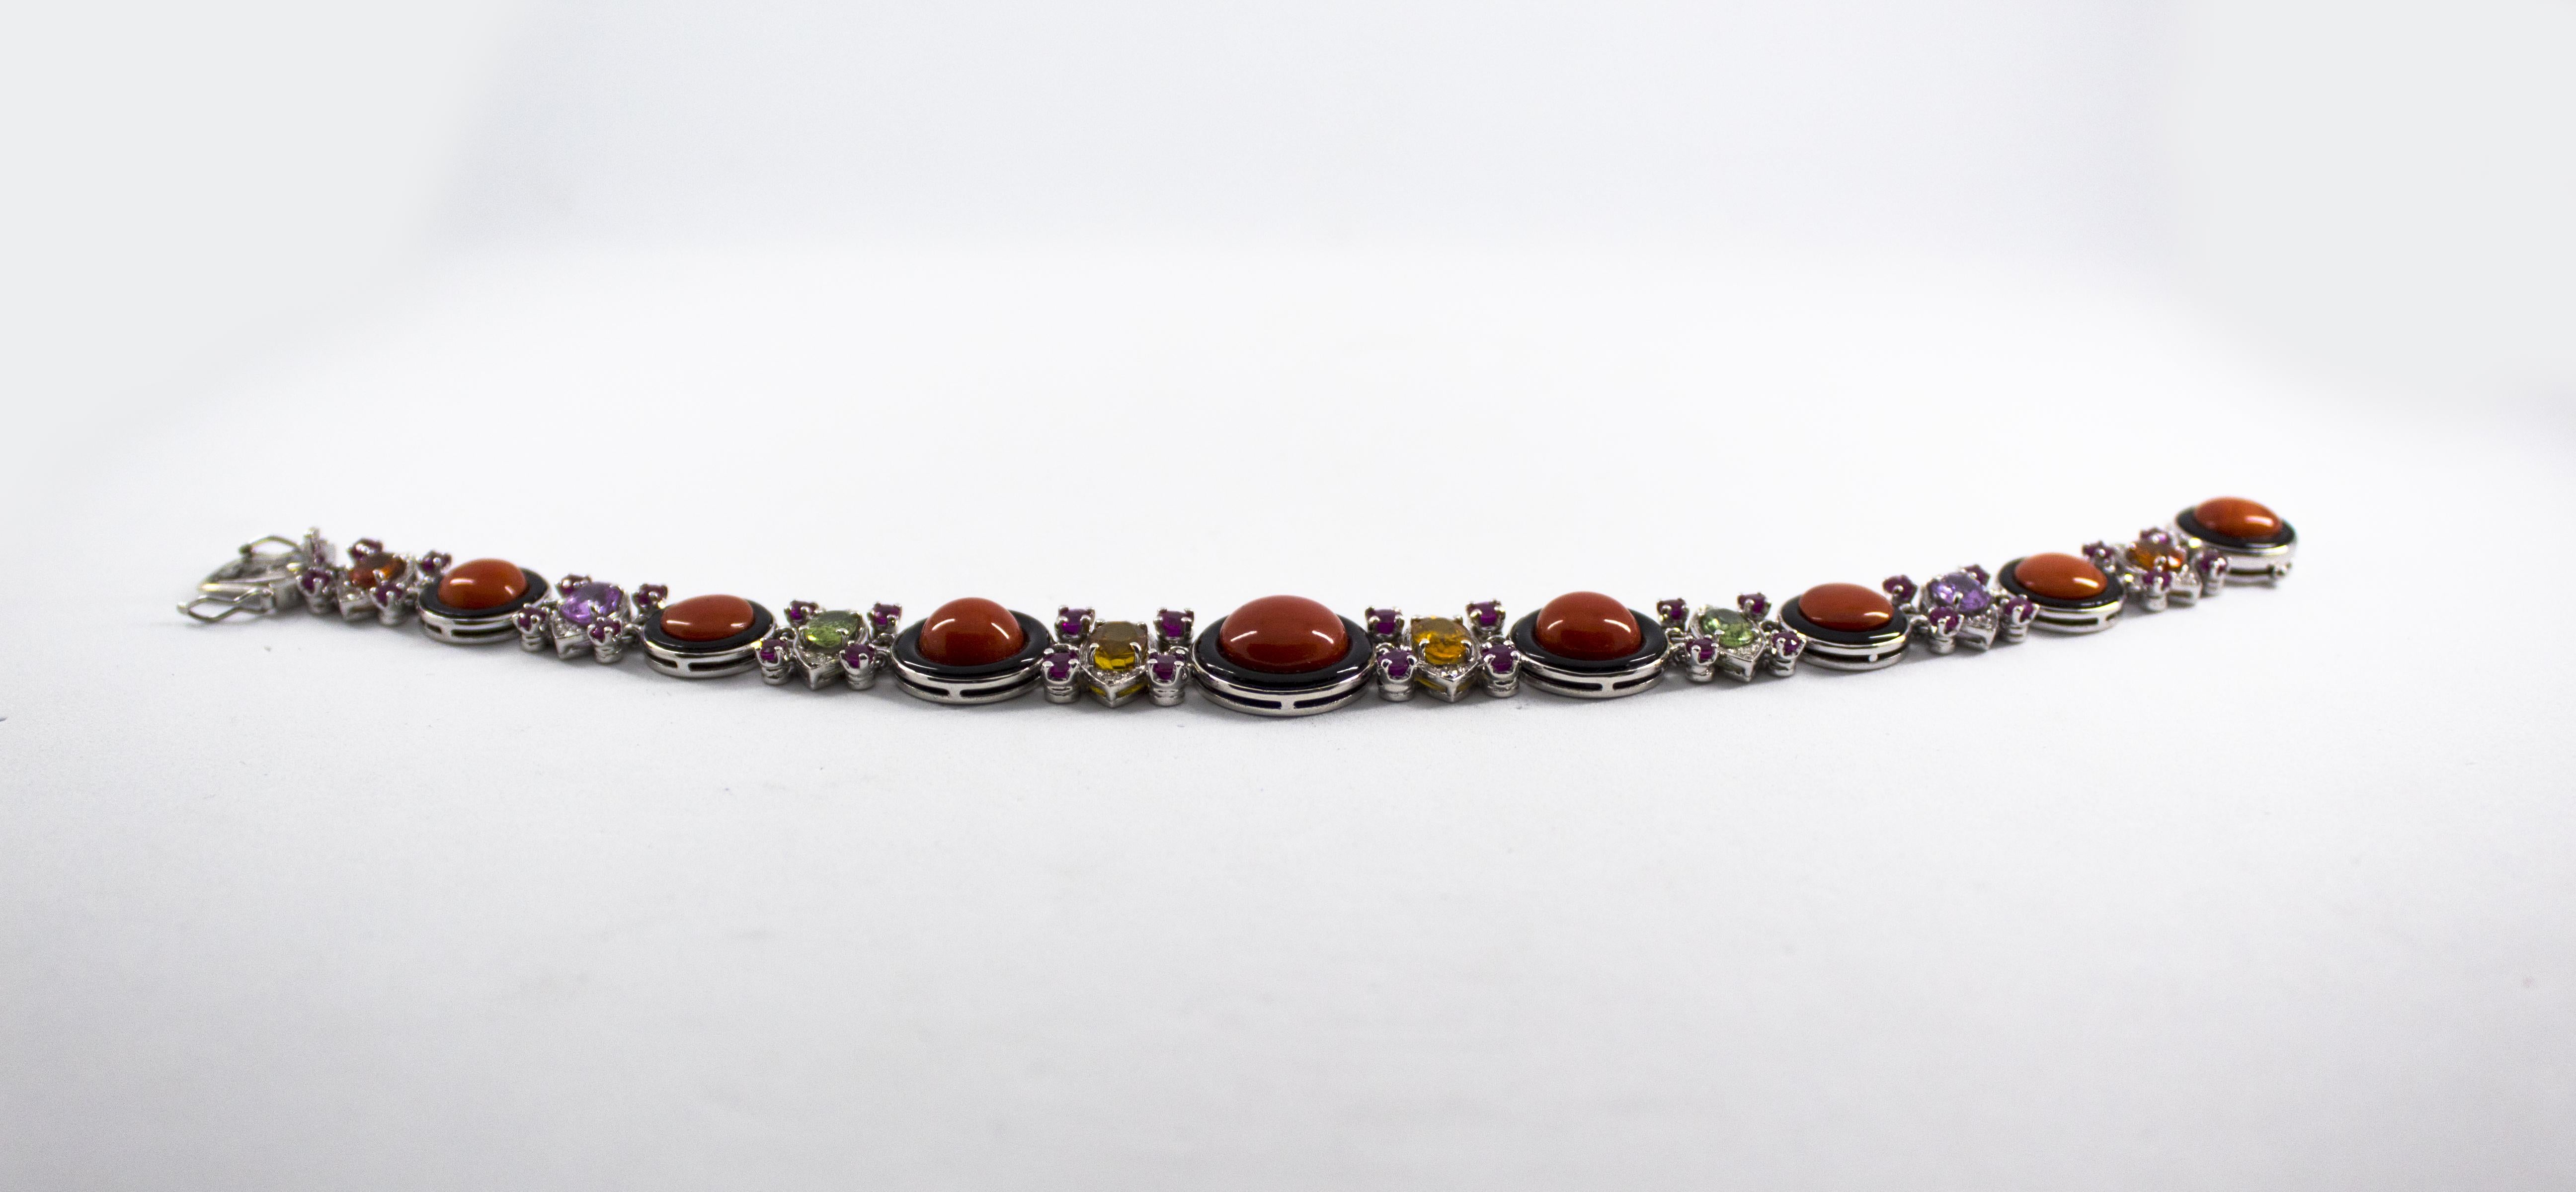 This Bracelet is made of 14K White Gold.
This Bracelet has 0.30 Carats of White Diamonds.
This Bracelet has 3.20 Carats of Rubies.
This Bracelet has 6.80 Carats of Colored Sapphires (Green, Pink and Yellow).
This Bracelet has also Mediterranean Red